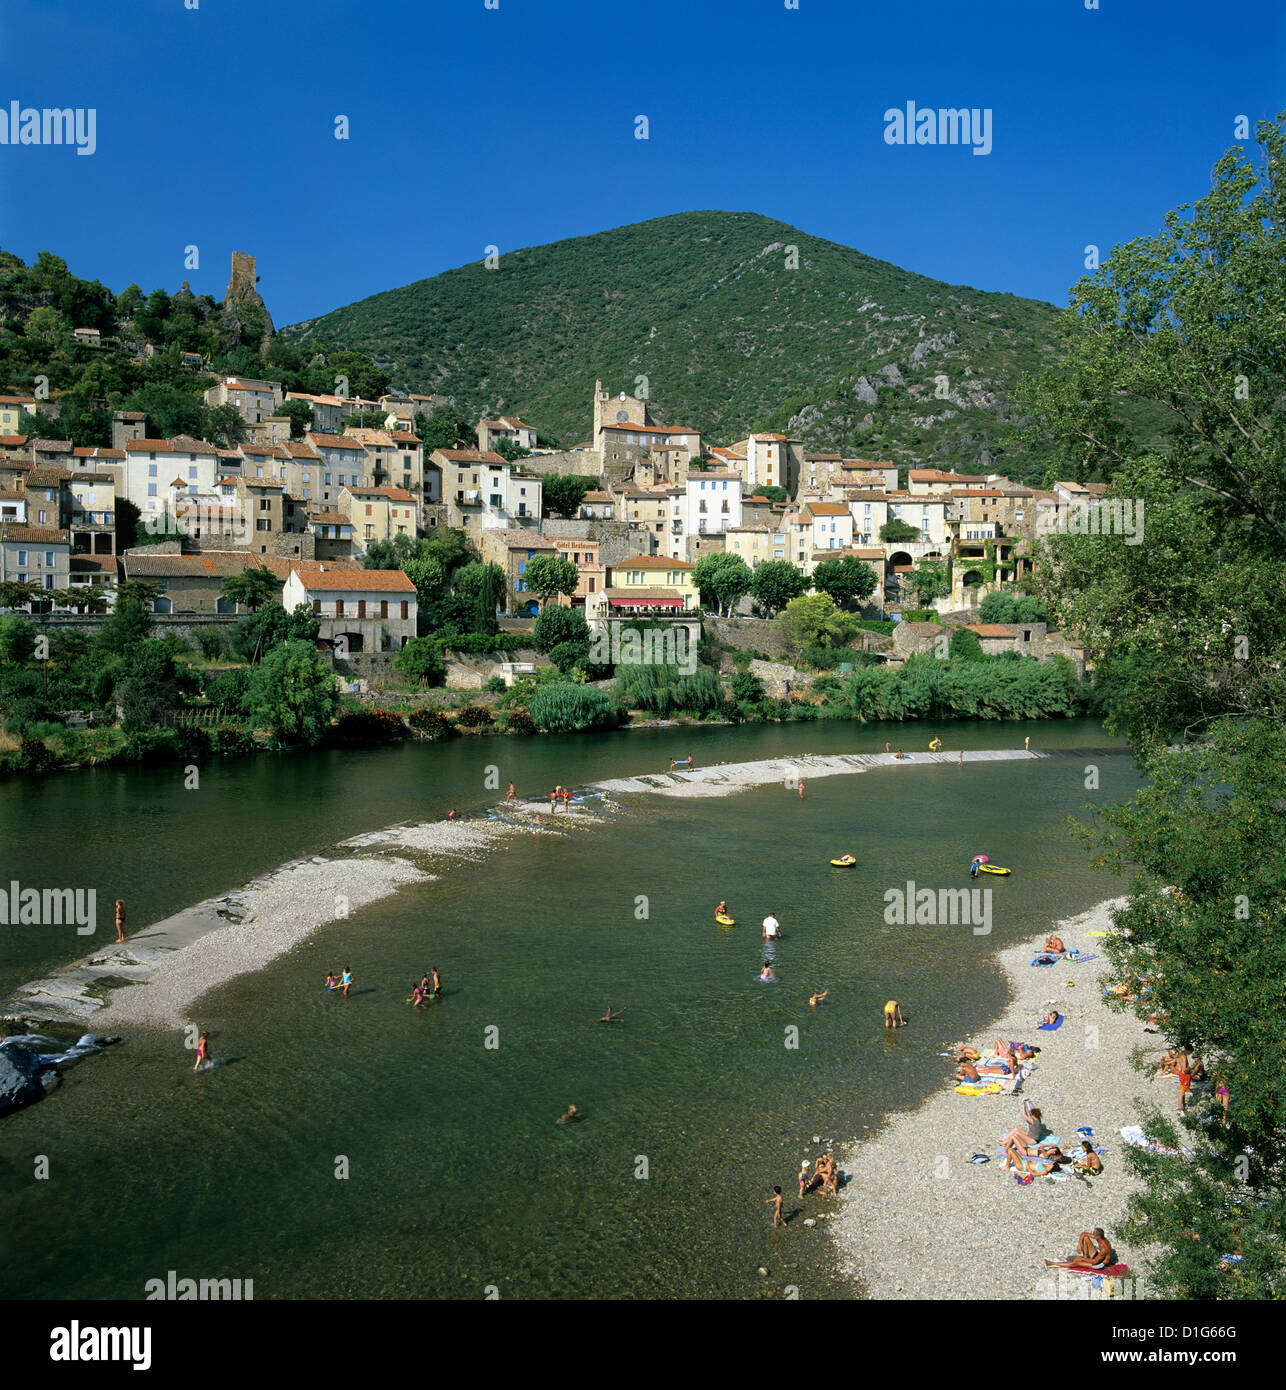 View over River Orb, Roquebrun, Languedoc-Roussillon, France, Europe Stock Photo